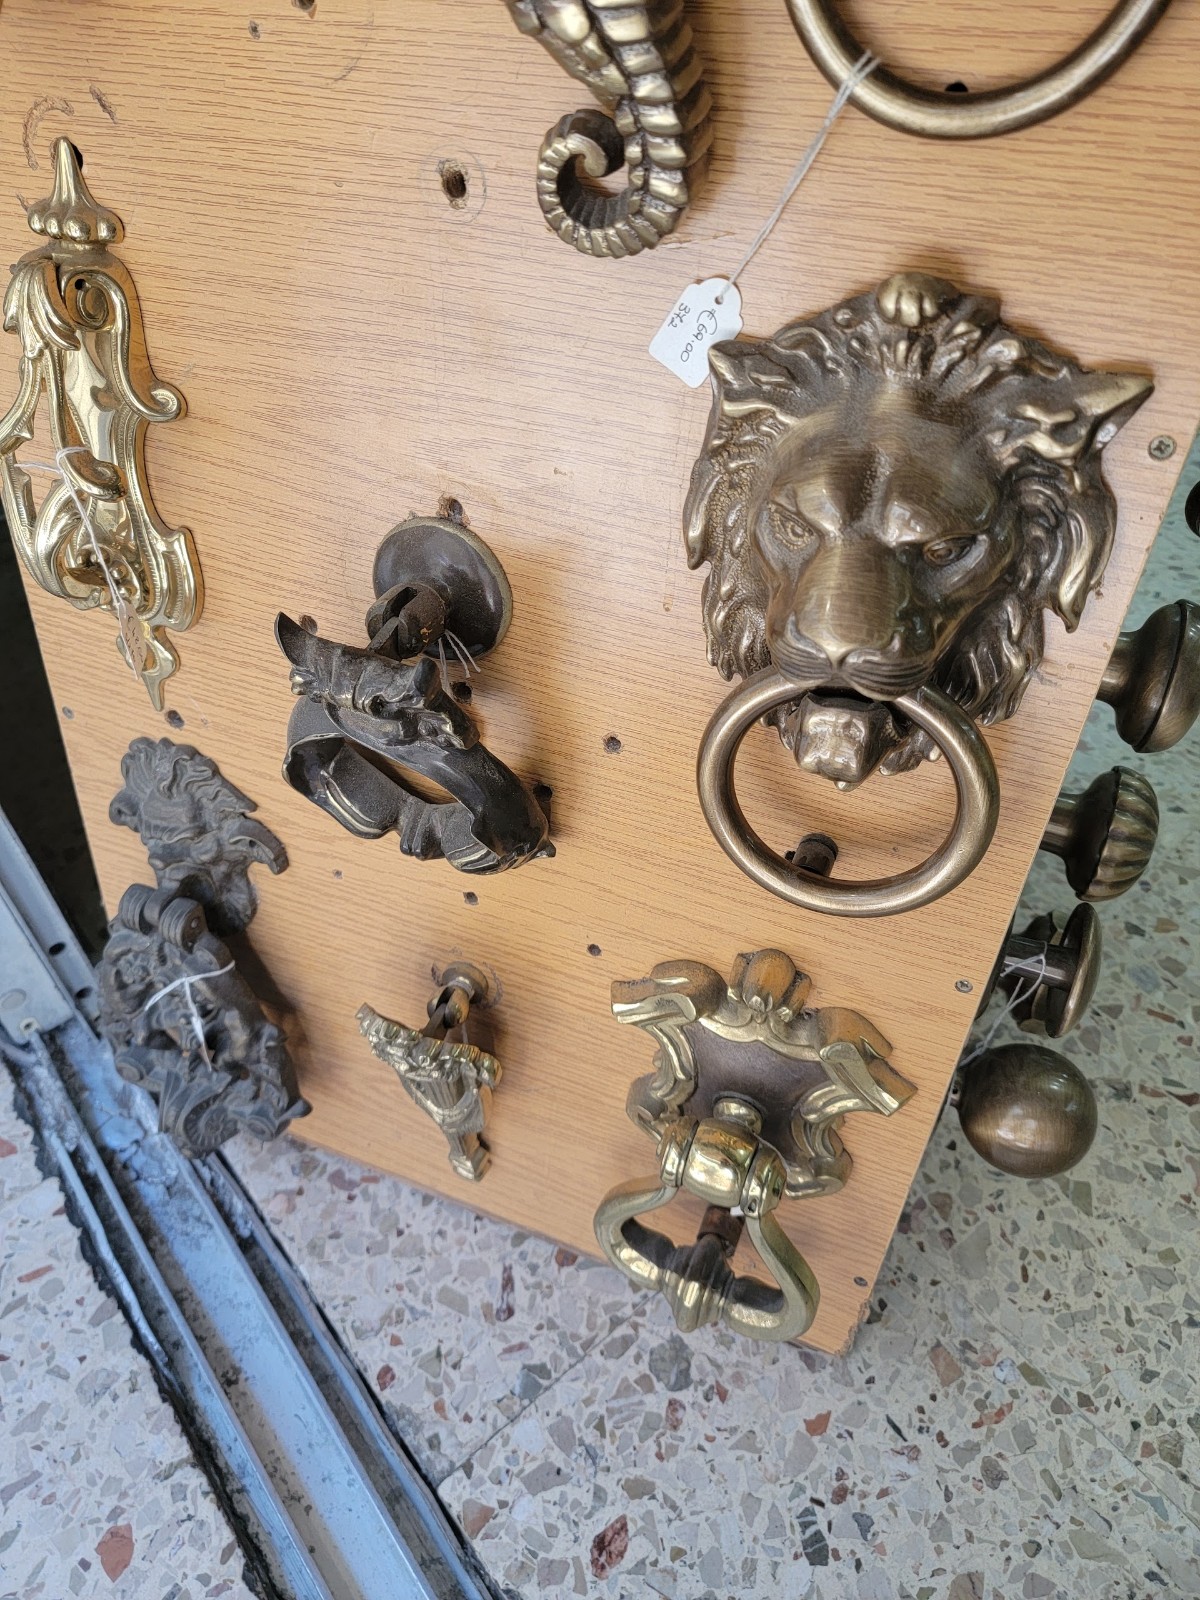 a group of brass knockers on a wood surface